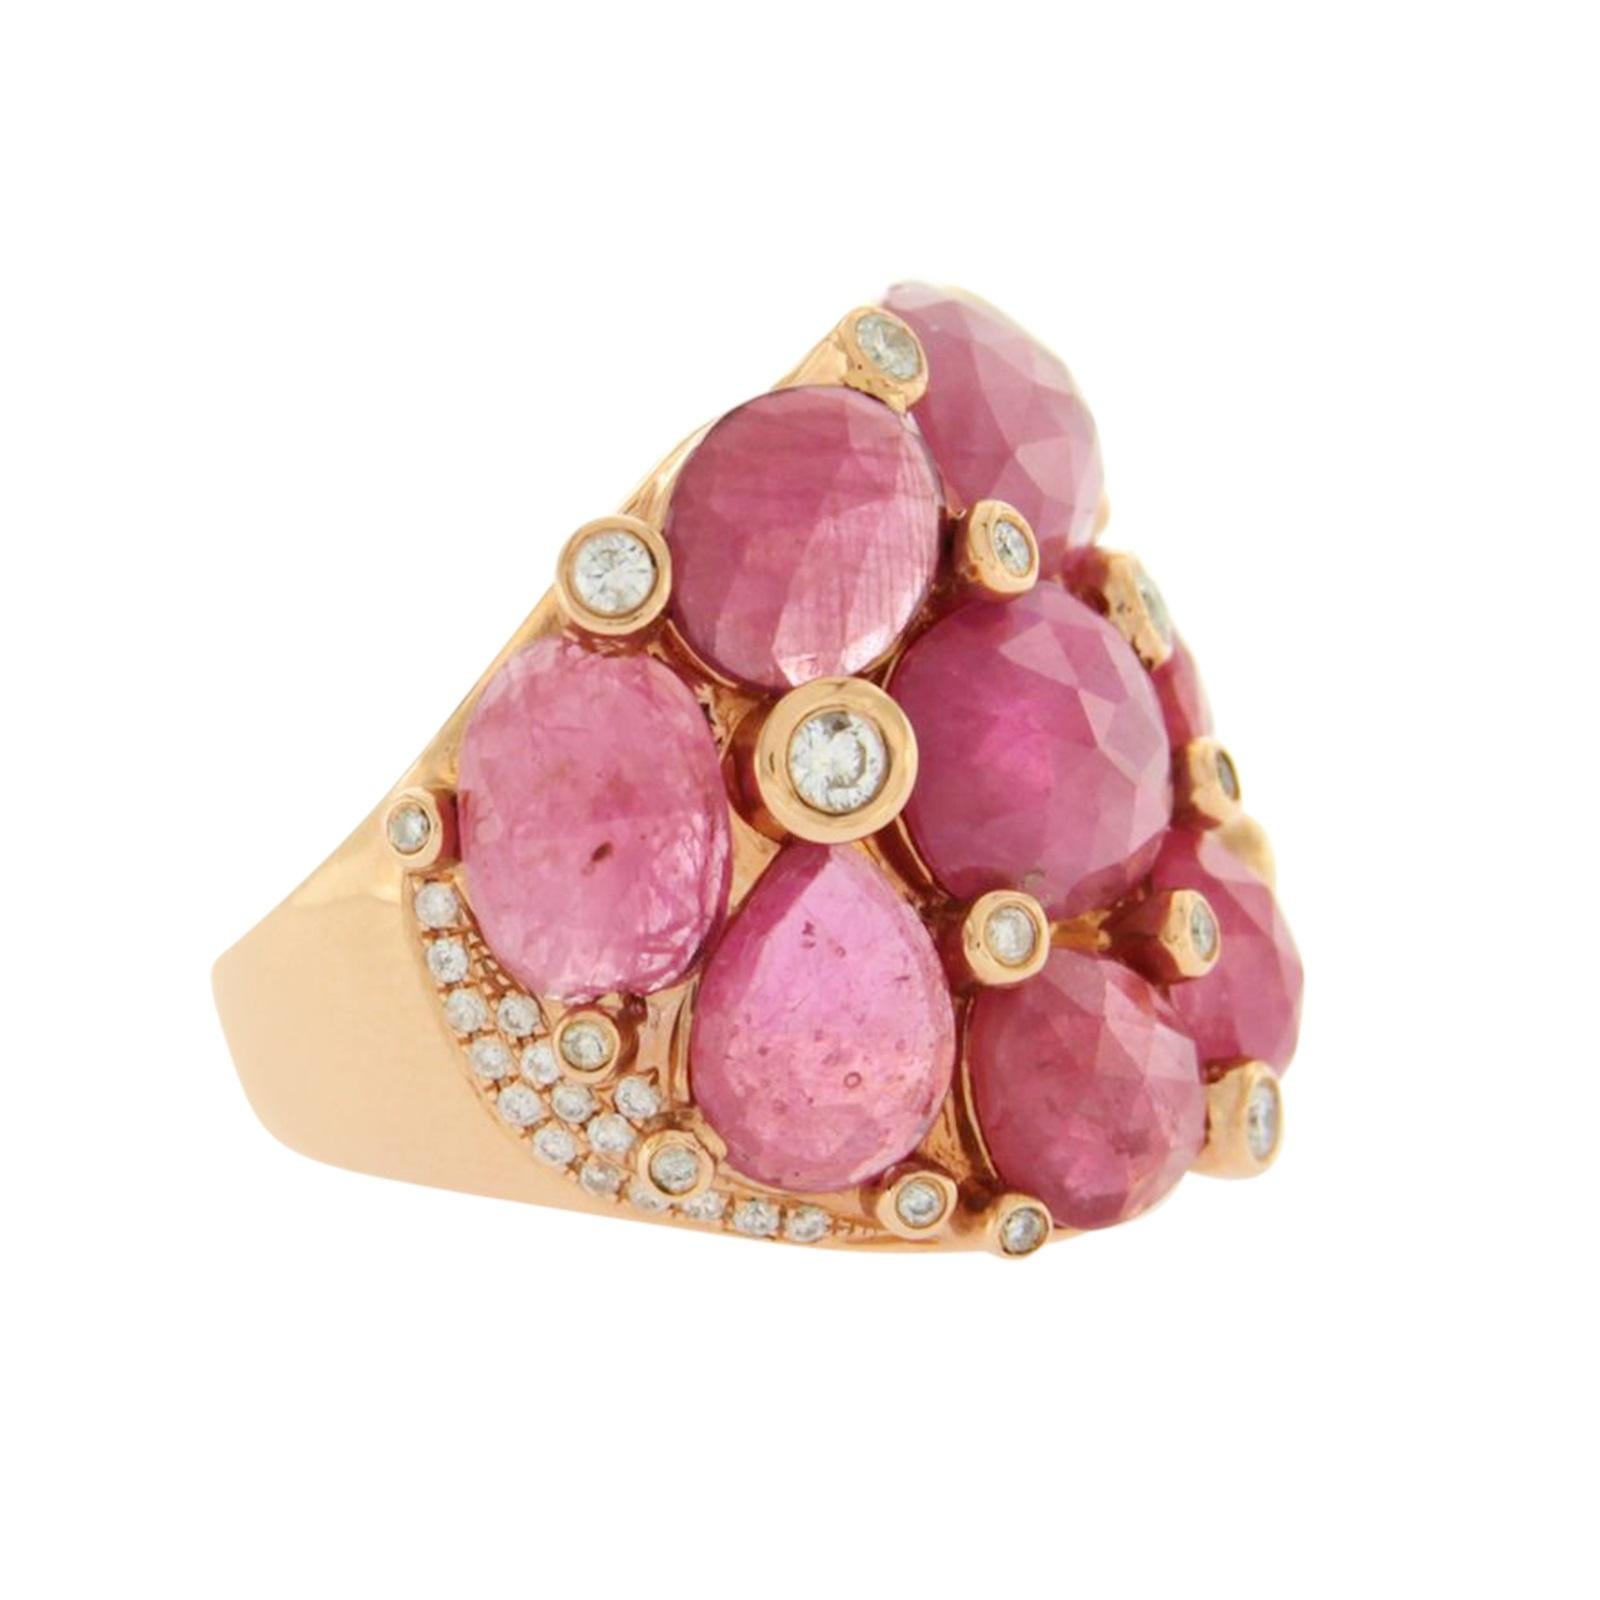 13.80 Ct Sliced Rose Cut Pink Sapphire & Diamonds In 14k Rose Gold Ring In Excellent Condition For Sale In Los Angeles, CA